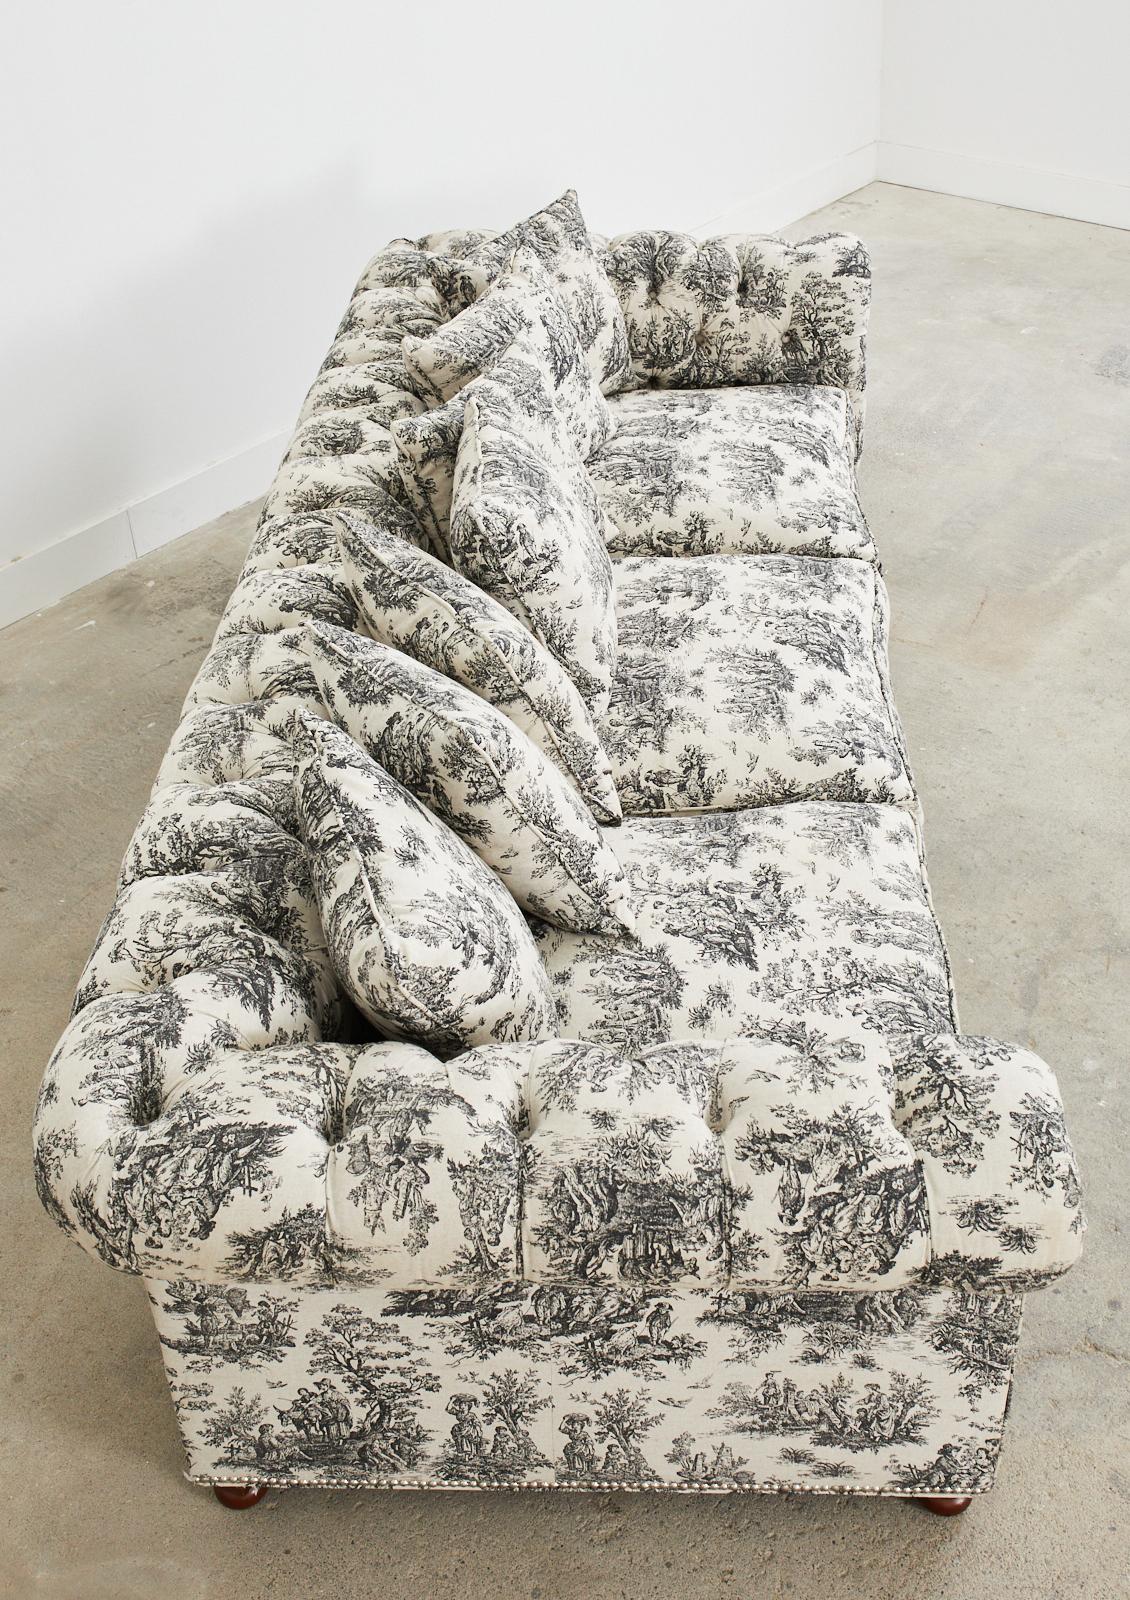 Christian Audigier Grande-Dame French Provincial Toile Tufted Sofa For Sale 4